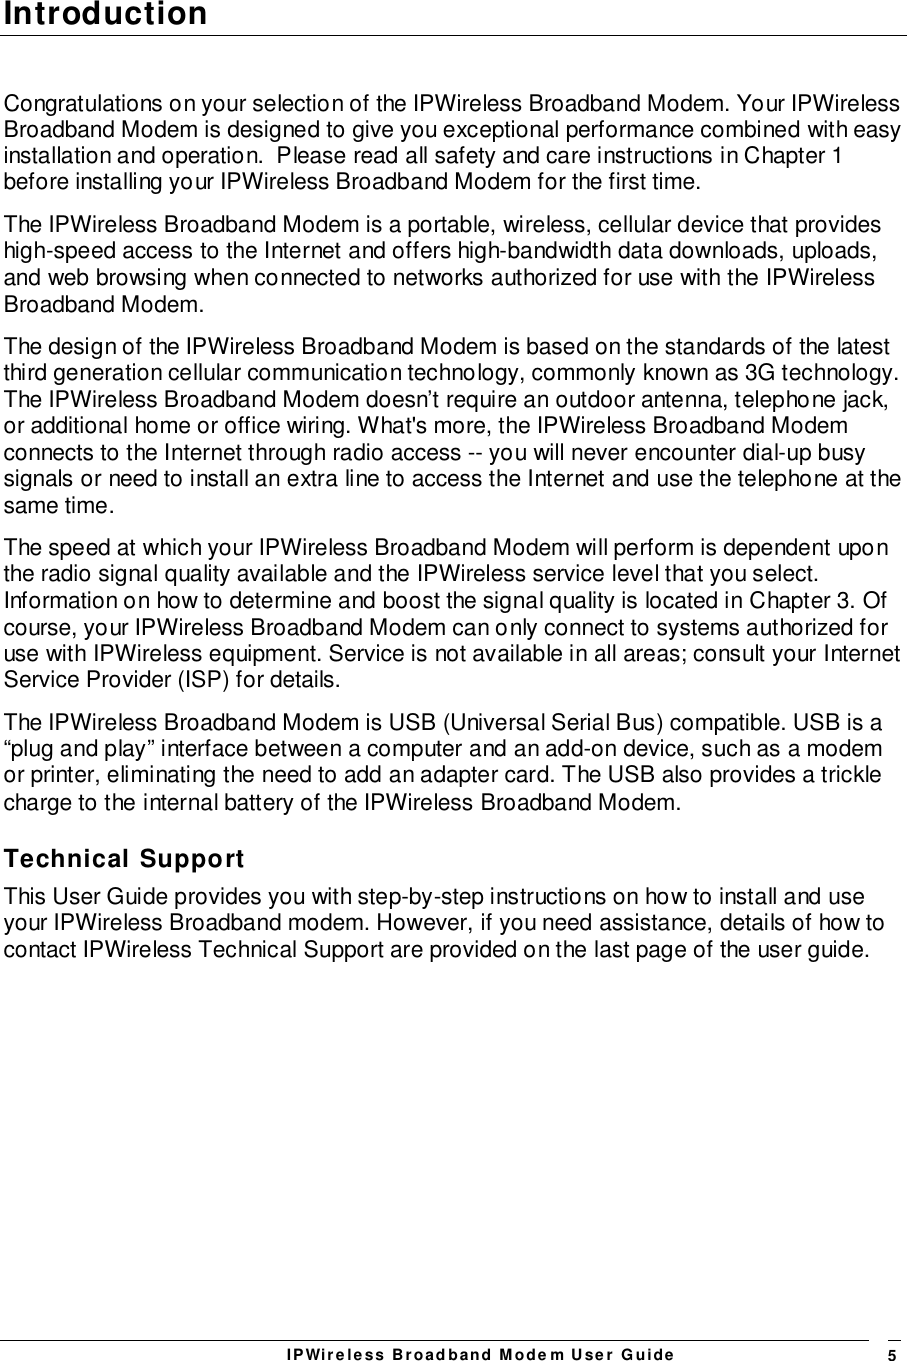 IPWireless Broadband Modem User Guide 5IntroductionCongratulations on your selection of the IPWireless Broadband Modem. Your IPWirelessBroadband Modem is designed to give you exceptional performance combined with easyinstallation and operation.  Please read all safety and care instructions in Chapter 1before installing your IPWireless Broadband Modem for the first time.The IPWireless Broadband Modem is a portable, wireless, cellular device that provideshigh-speed access to the Internet and offers high-bandwidth data downloads, uploads,and web browsing when connected to networks authorized for use with the IPWirelessBroadband Modem.The design of the IPWireless Broadband Modem is based on the standards of the latestthird generation cellular communication technology, commonly known as 3G technology.The IPWireless Broadband Modem doesn’t require an outdoor antenna, telephone jack,or additional home or office wiring. What&apos;s more, the IPWireless Broadband Modemconnects to the Internet through radio access -- you will never encounter dial-up busysignals or need to install an extra line to access the Internet and use the telephone at thesame time.The speed at which your IPWireless Broadband Modem will perform is dependent uponthe radio signal quality available and the IPWireless service level that you select.Information on how to determine and boost the signal quality is located in Chapter 3. Ofcourse, your IPWireless Broadband Modem can only connect to systems authorized foruse with IPWireless equipment. Service is not available in all areas; consult your InternetService Provider (ISP) for details.The IPWireless Broadband Modem is USB (Universal Serial Bus) compatible. USB is a“plug and play” interface between a computer and an add-on device, such as a modemor printer, eliminating the need to add an adapter card. The USB also provides a tricklecharge to the internal battery of the IPWireless Broadband Modem.Technical SupportThis User Guide provides you with step-by-step instructions on how to install and useyour IPWireless Broadband modem. However, if you need assistance, details of how tocontact IPWireless Technical Support are provided on the last page of the user guide.   